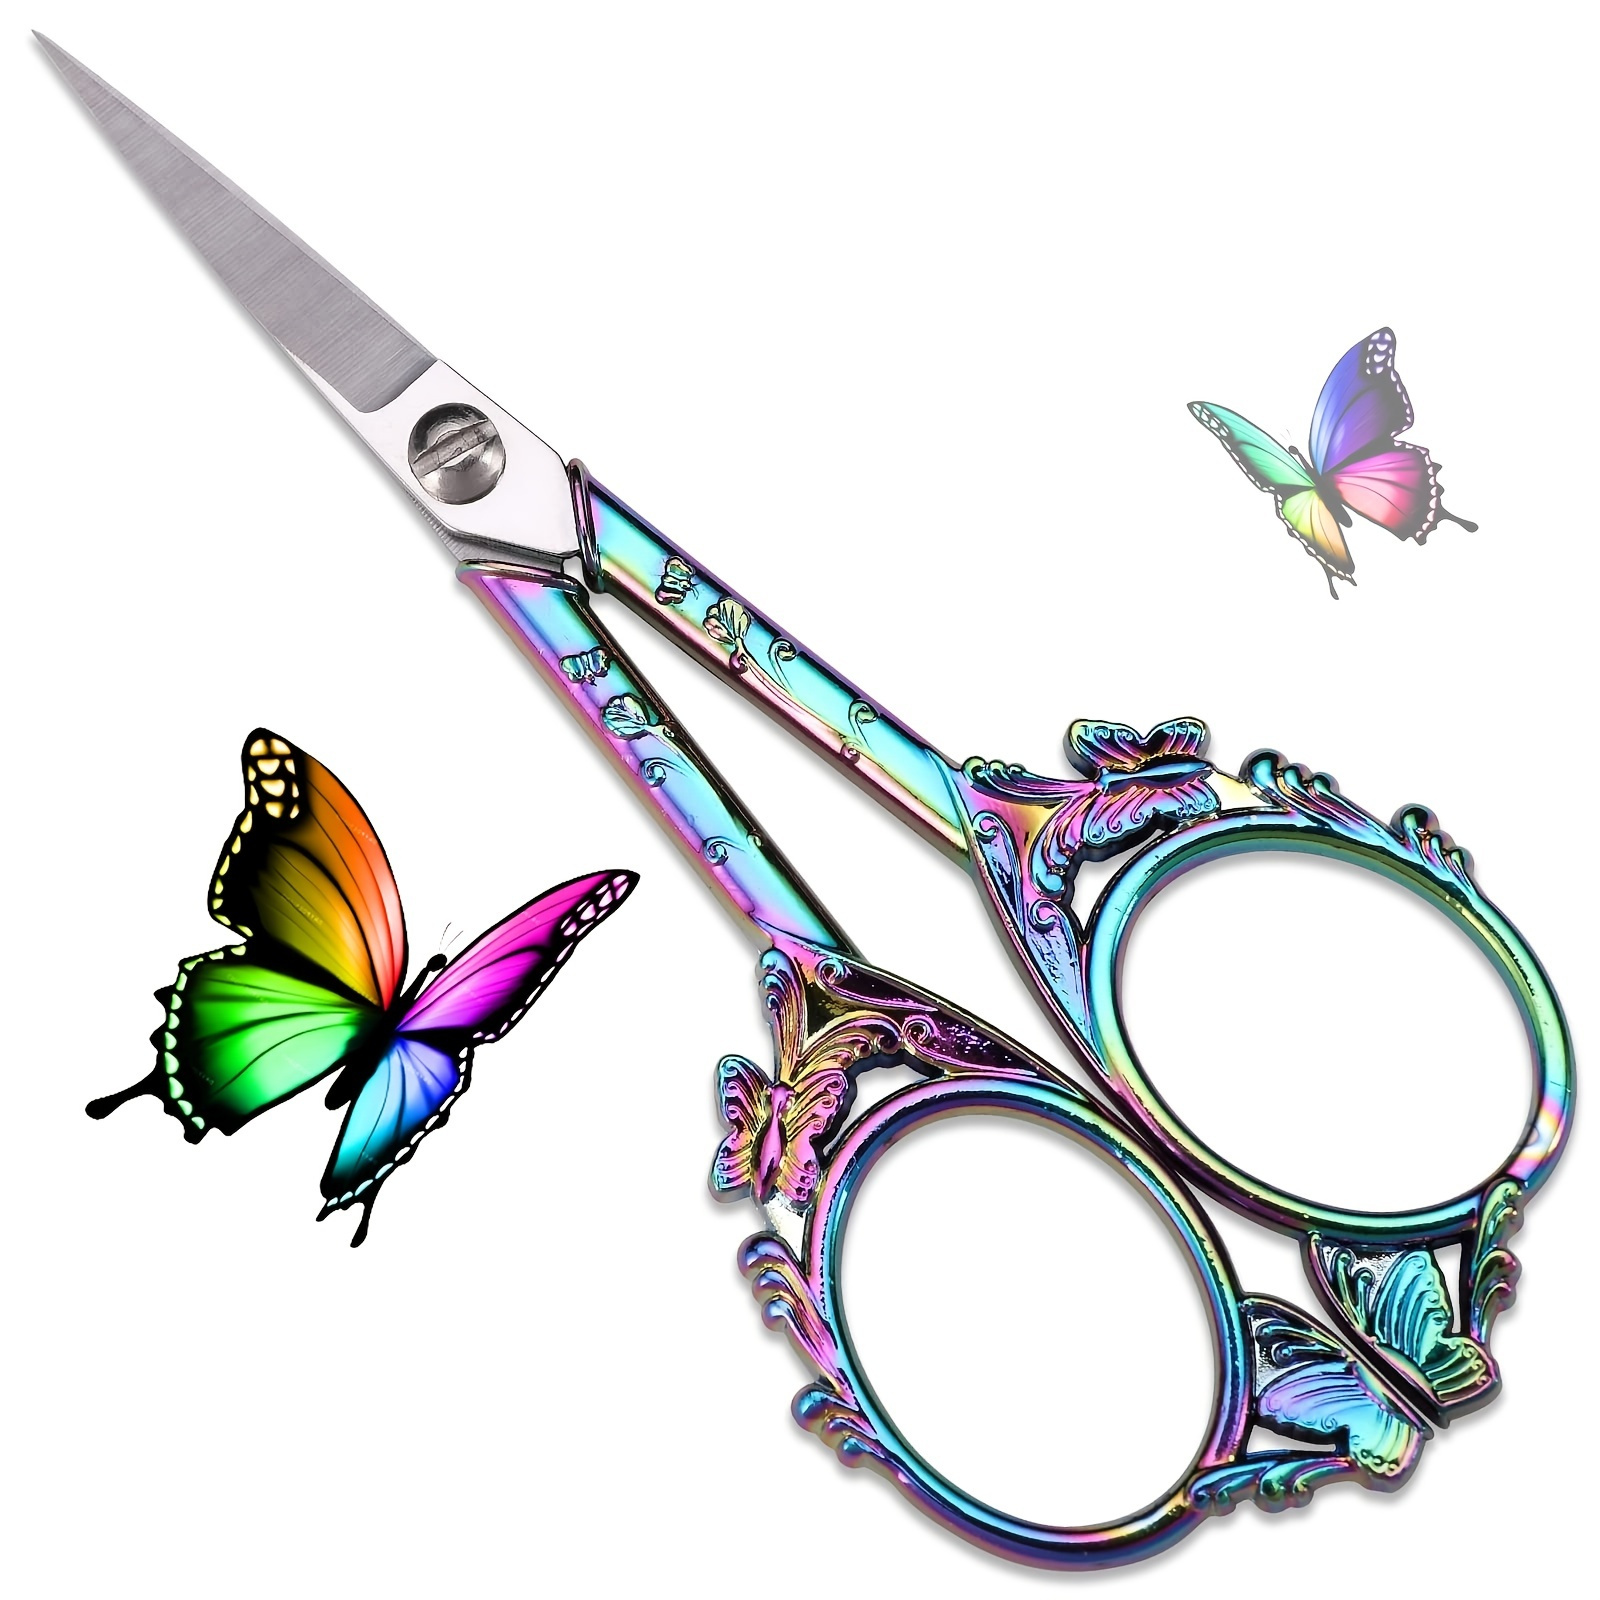 

1pc Sewing Embroidery Scissors Small Vintage Sharp Detail Shears For Craft, Artwork, Needlework Yarn, Handicraft Diy Tool, Thread Snips, 4.7in Butterfly Style